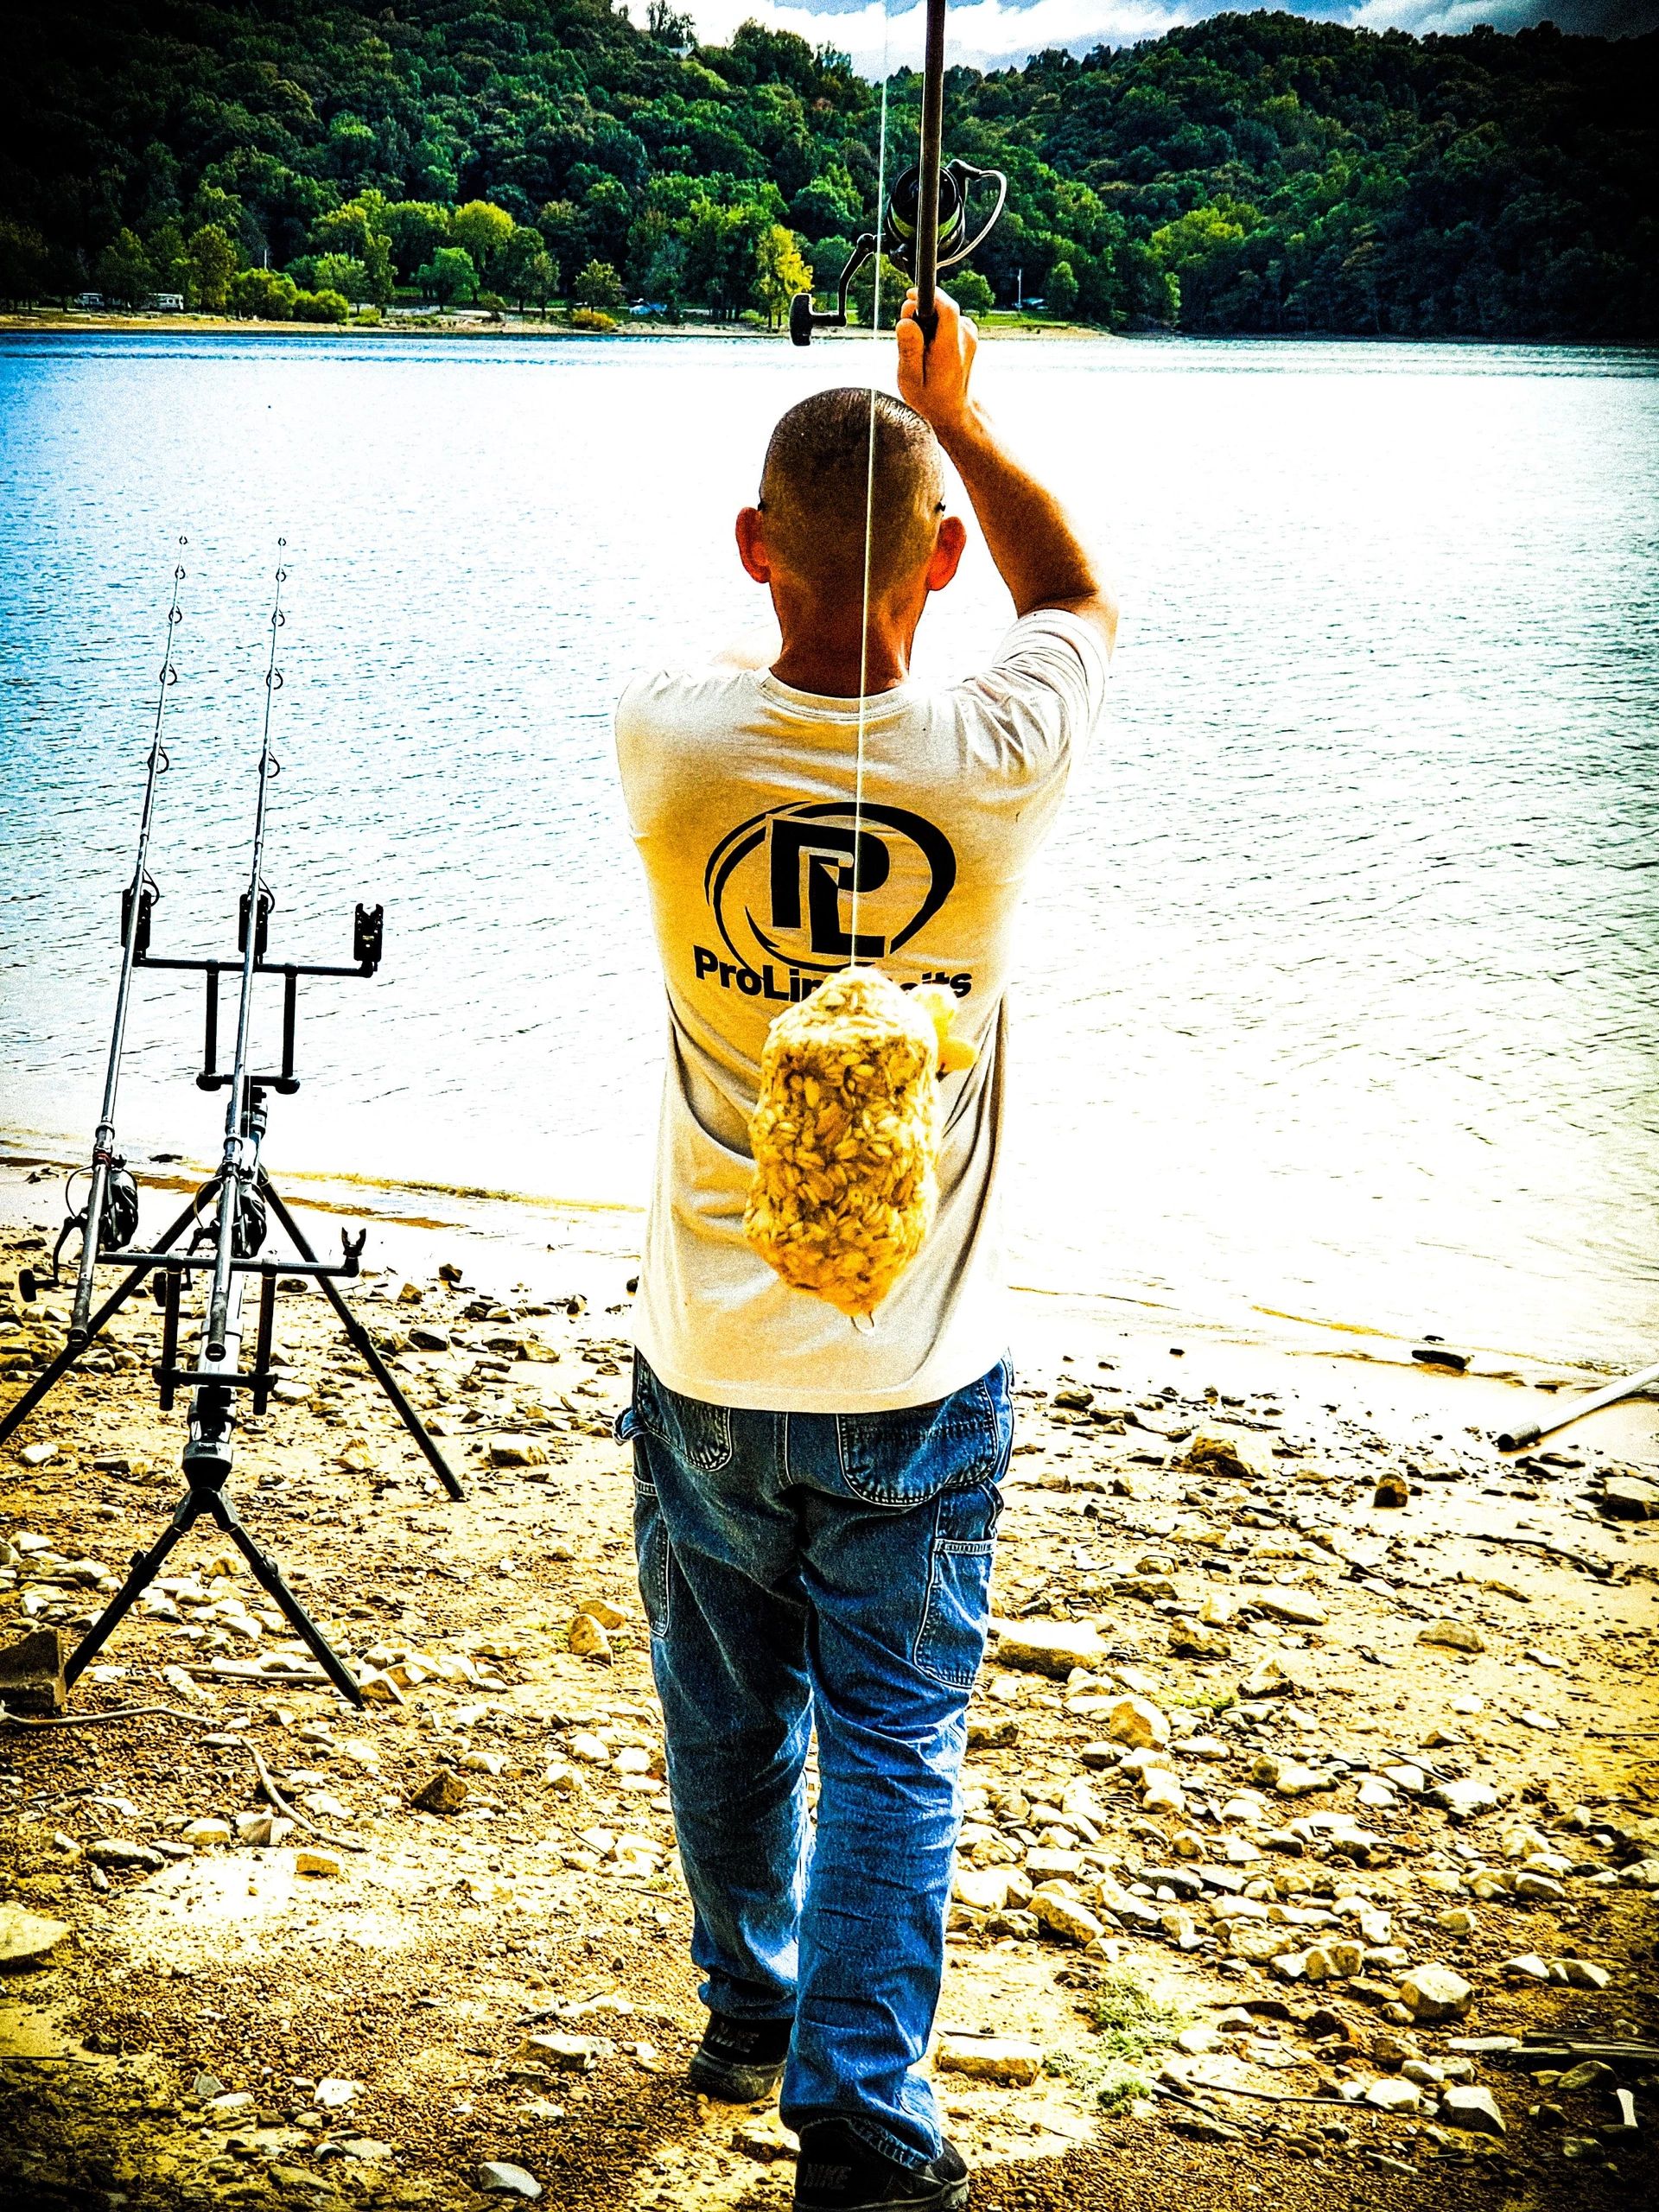 Tommy putting ProLine Baits to work!